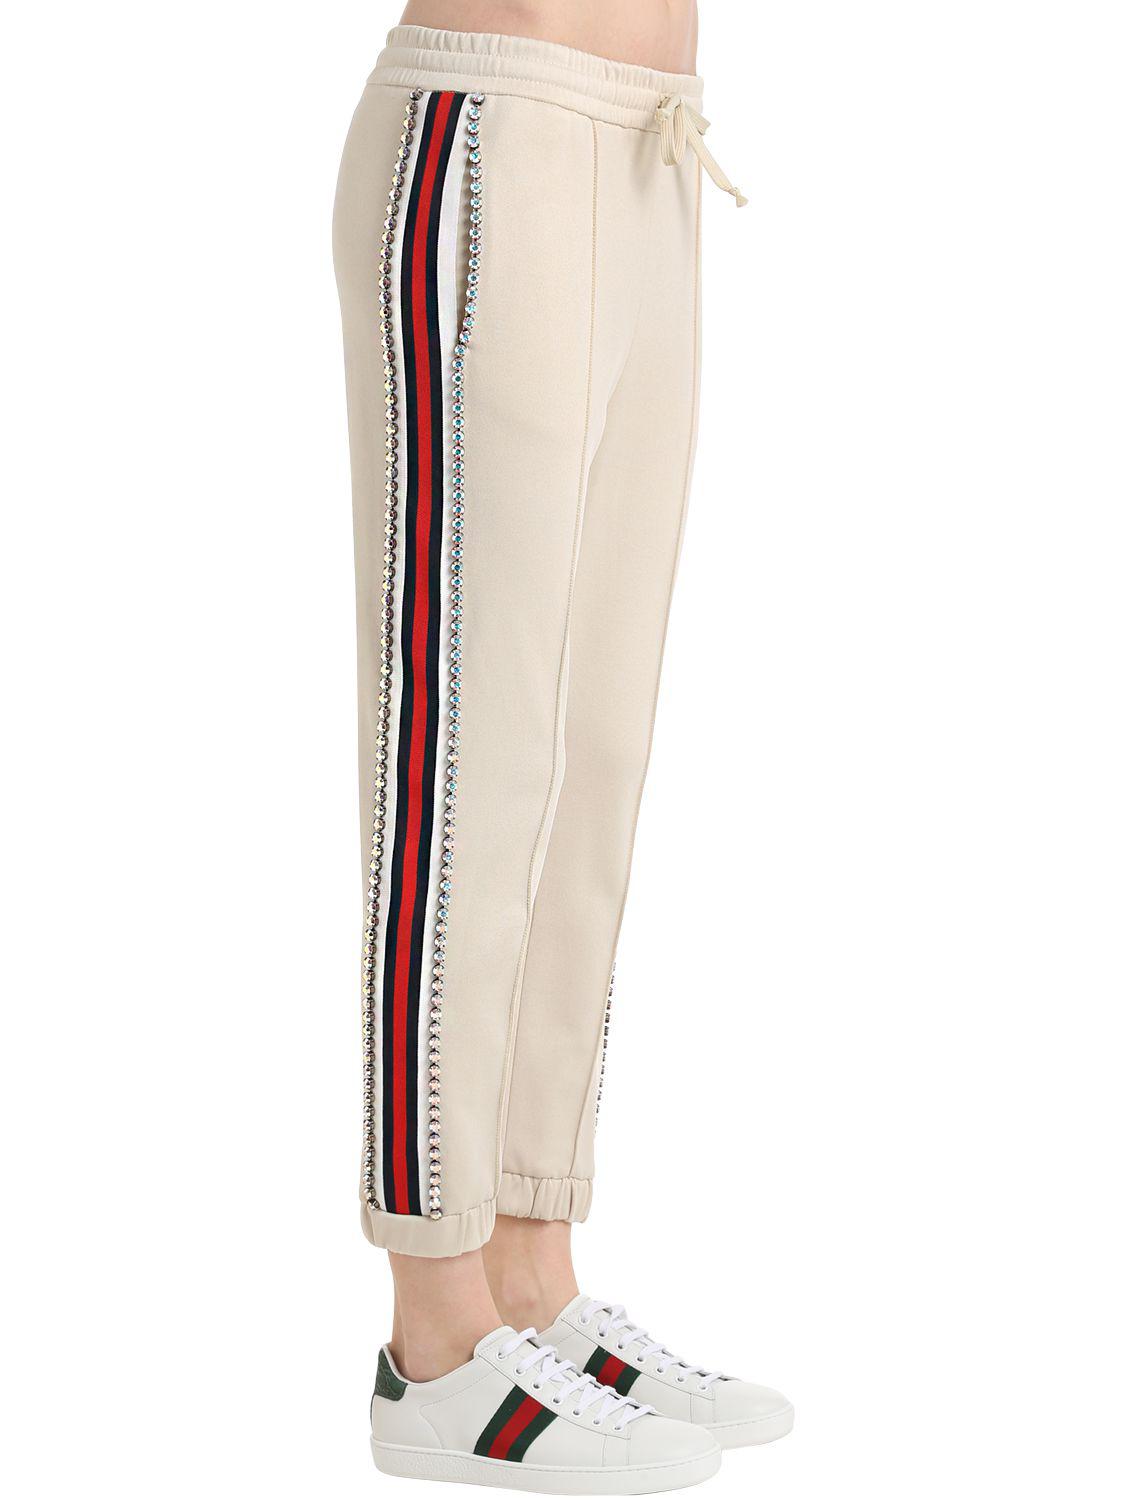 Gucci Crystal Techno Jersey Track Pants in White - Lyst